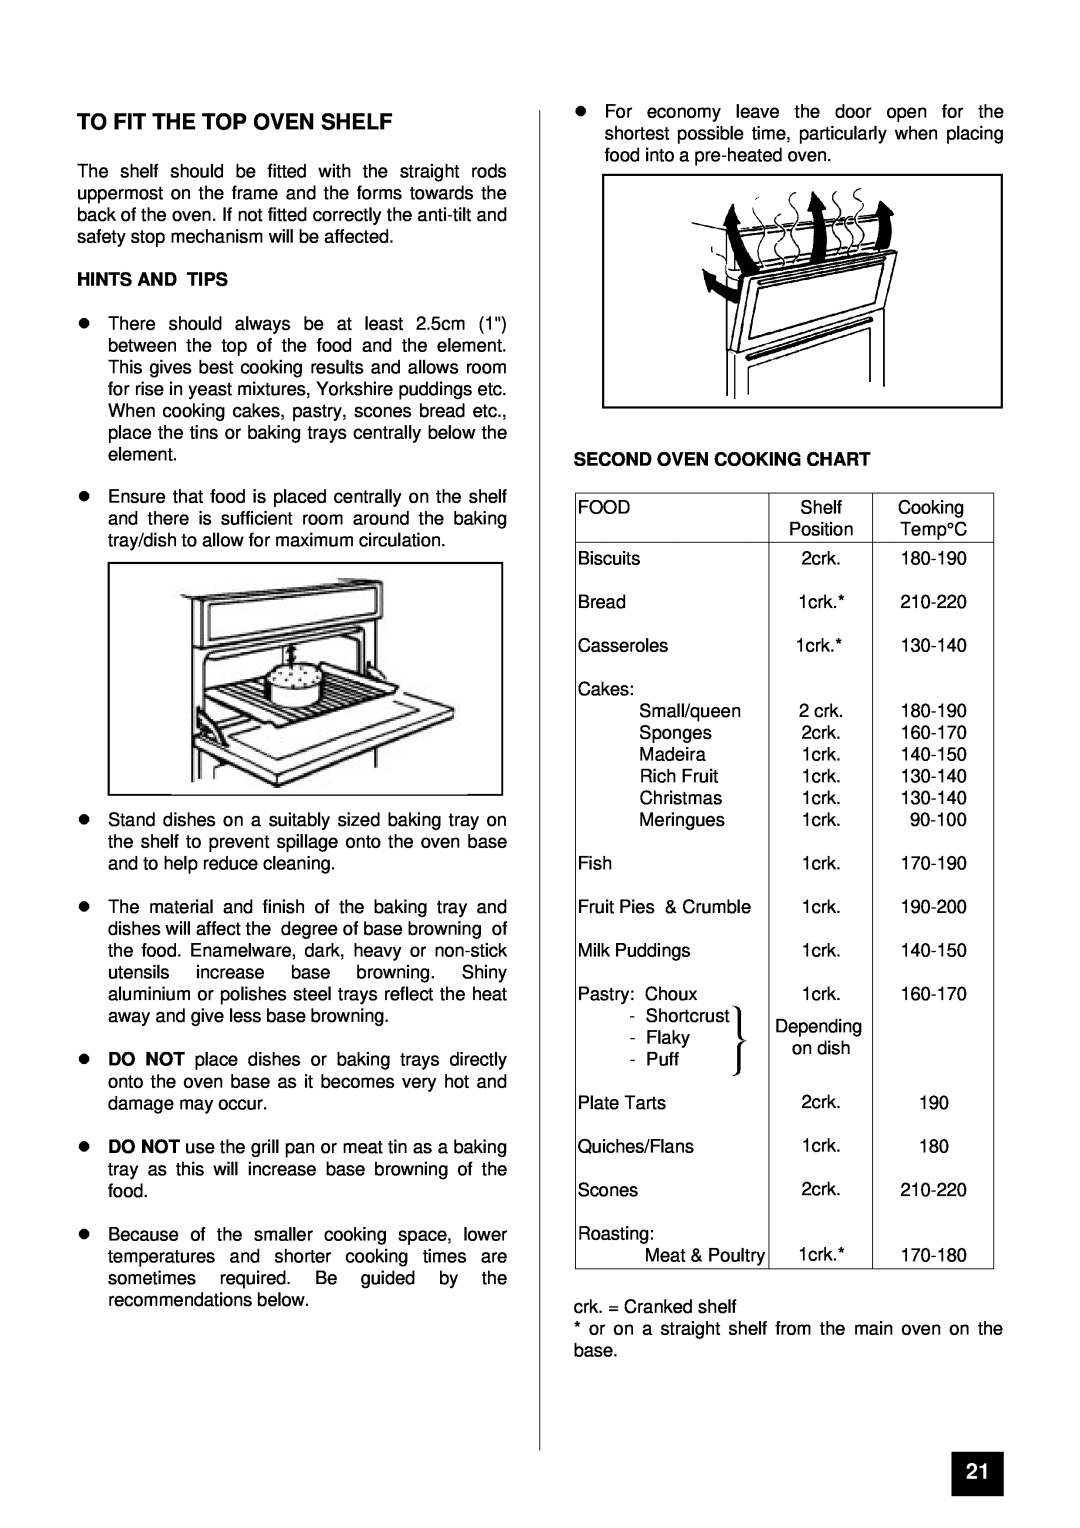 Tricity Bendix BD 921 installation instructions To Fit The Top Oven Shelf, lHINTS AND TIPS, Second Oven Cooking Chart 